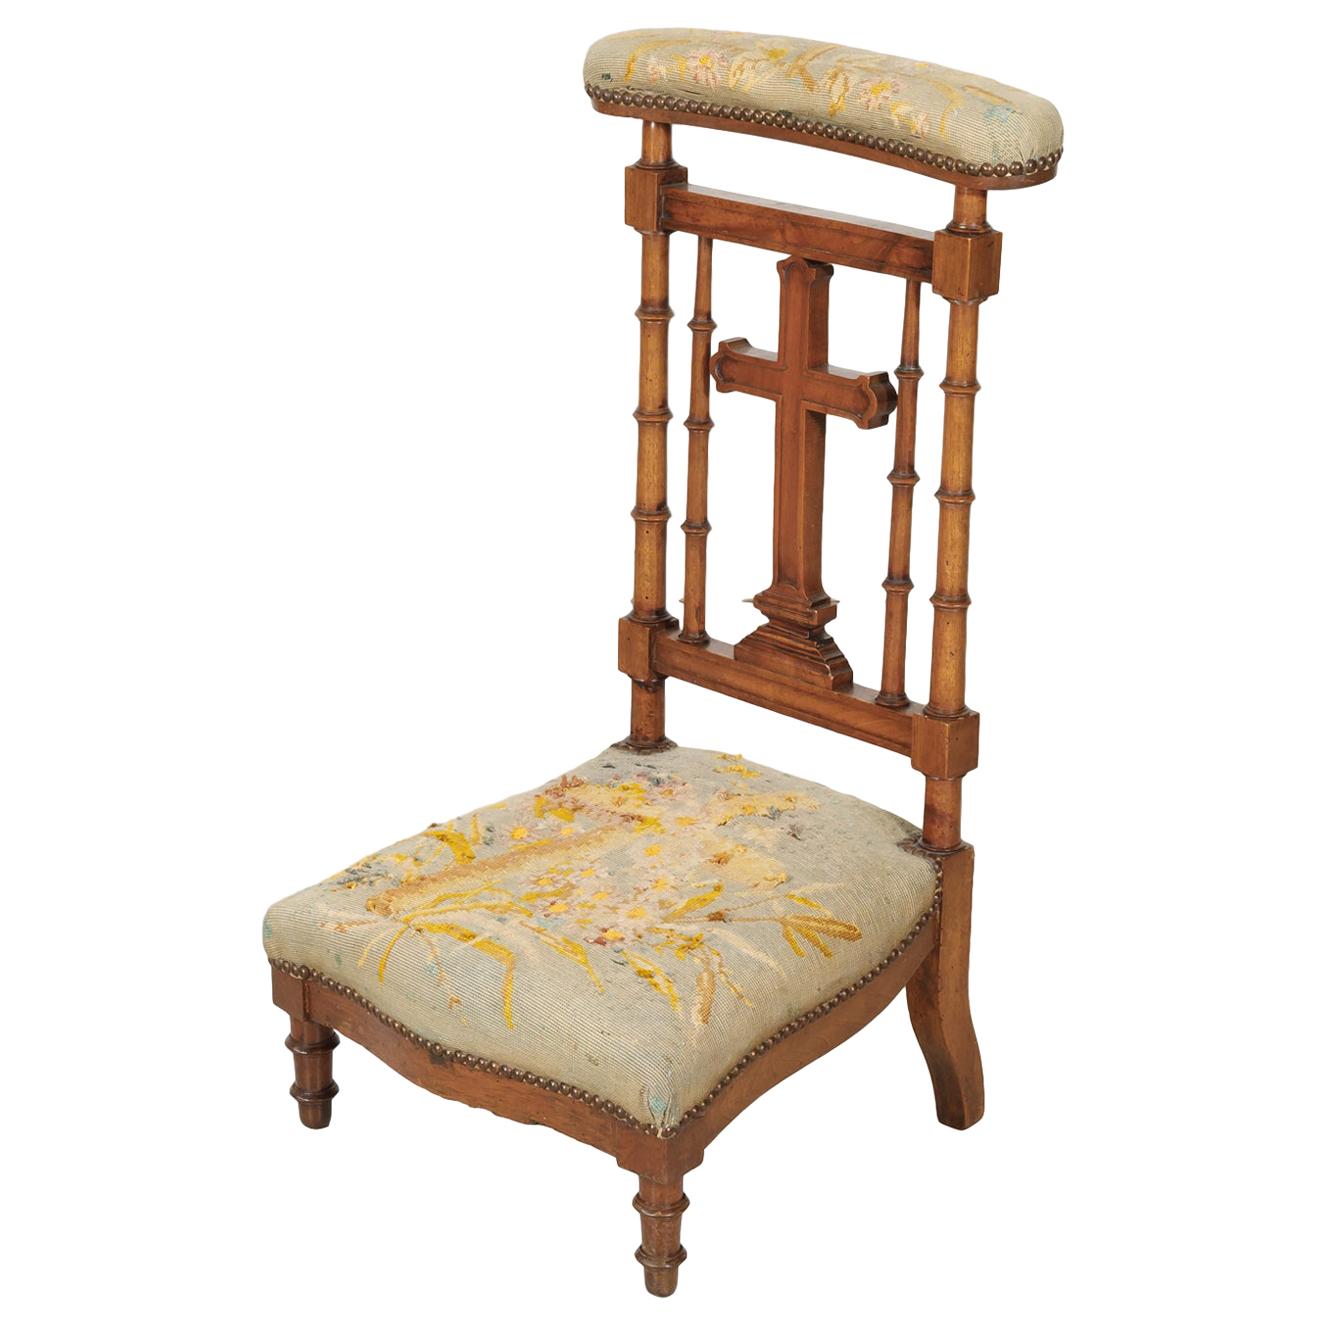 19th Century French Napoleon III Period Prie Dieu or Prayer Chair